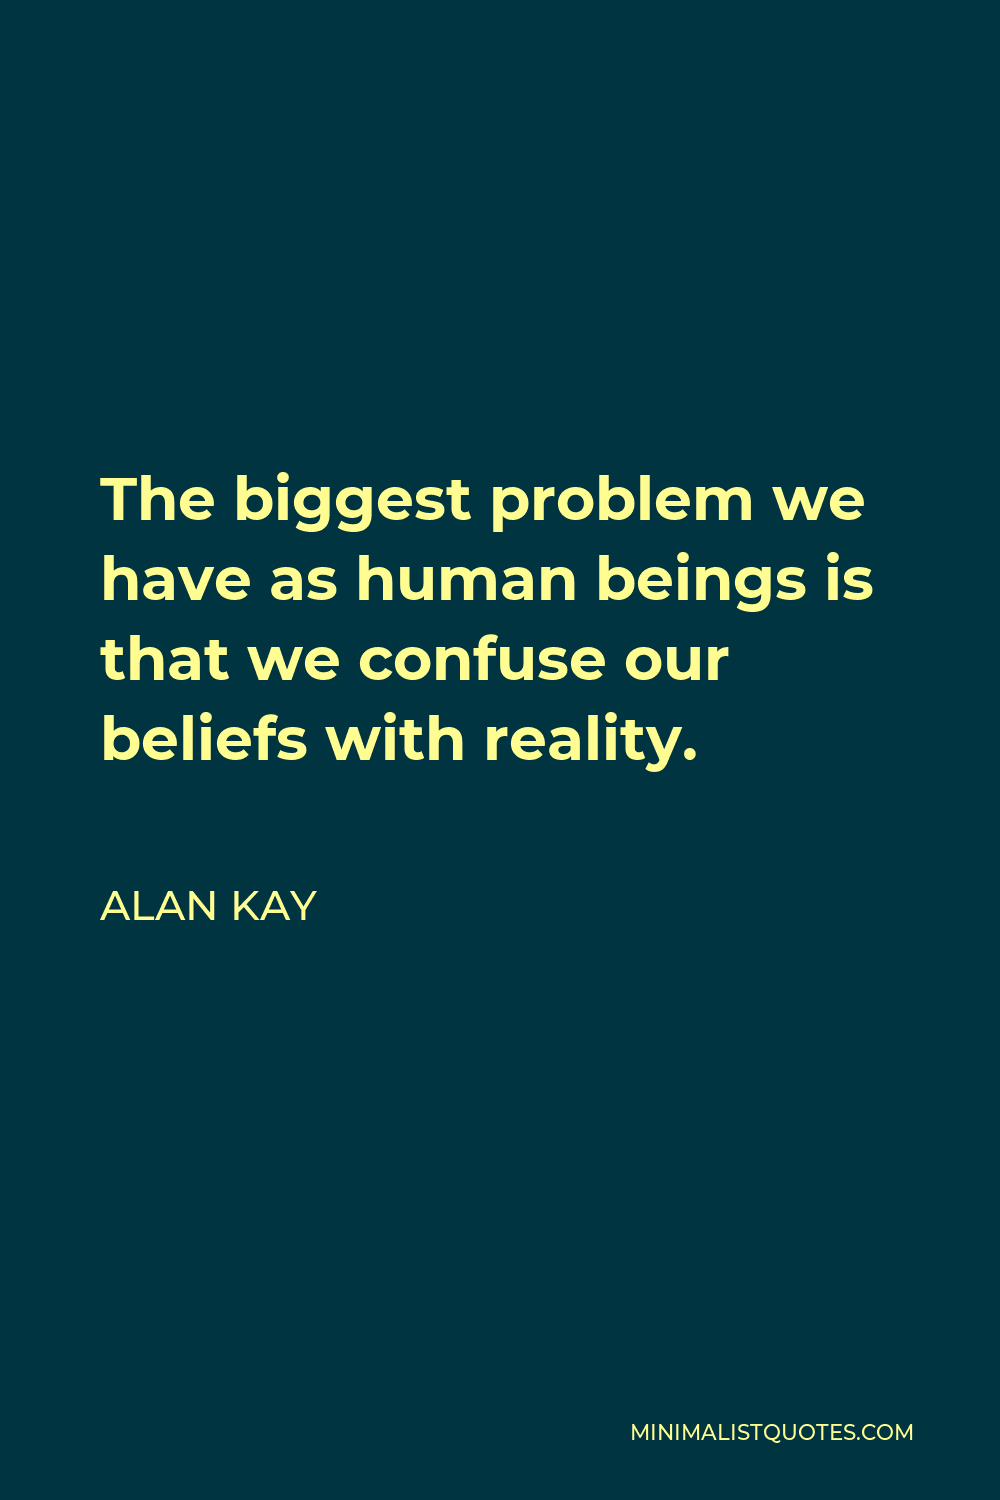 Alan Kay Quote - The biggest problem we have as human beings is that we confuse our beliefs with reality.